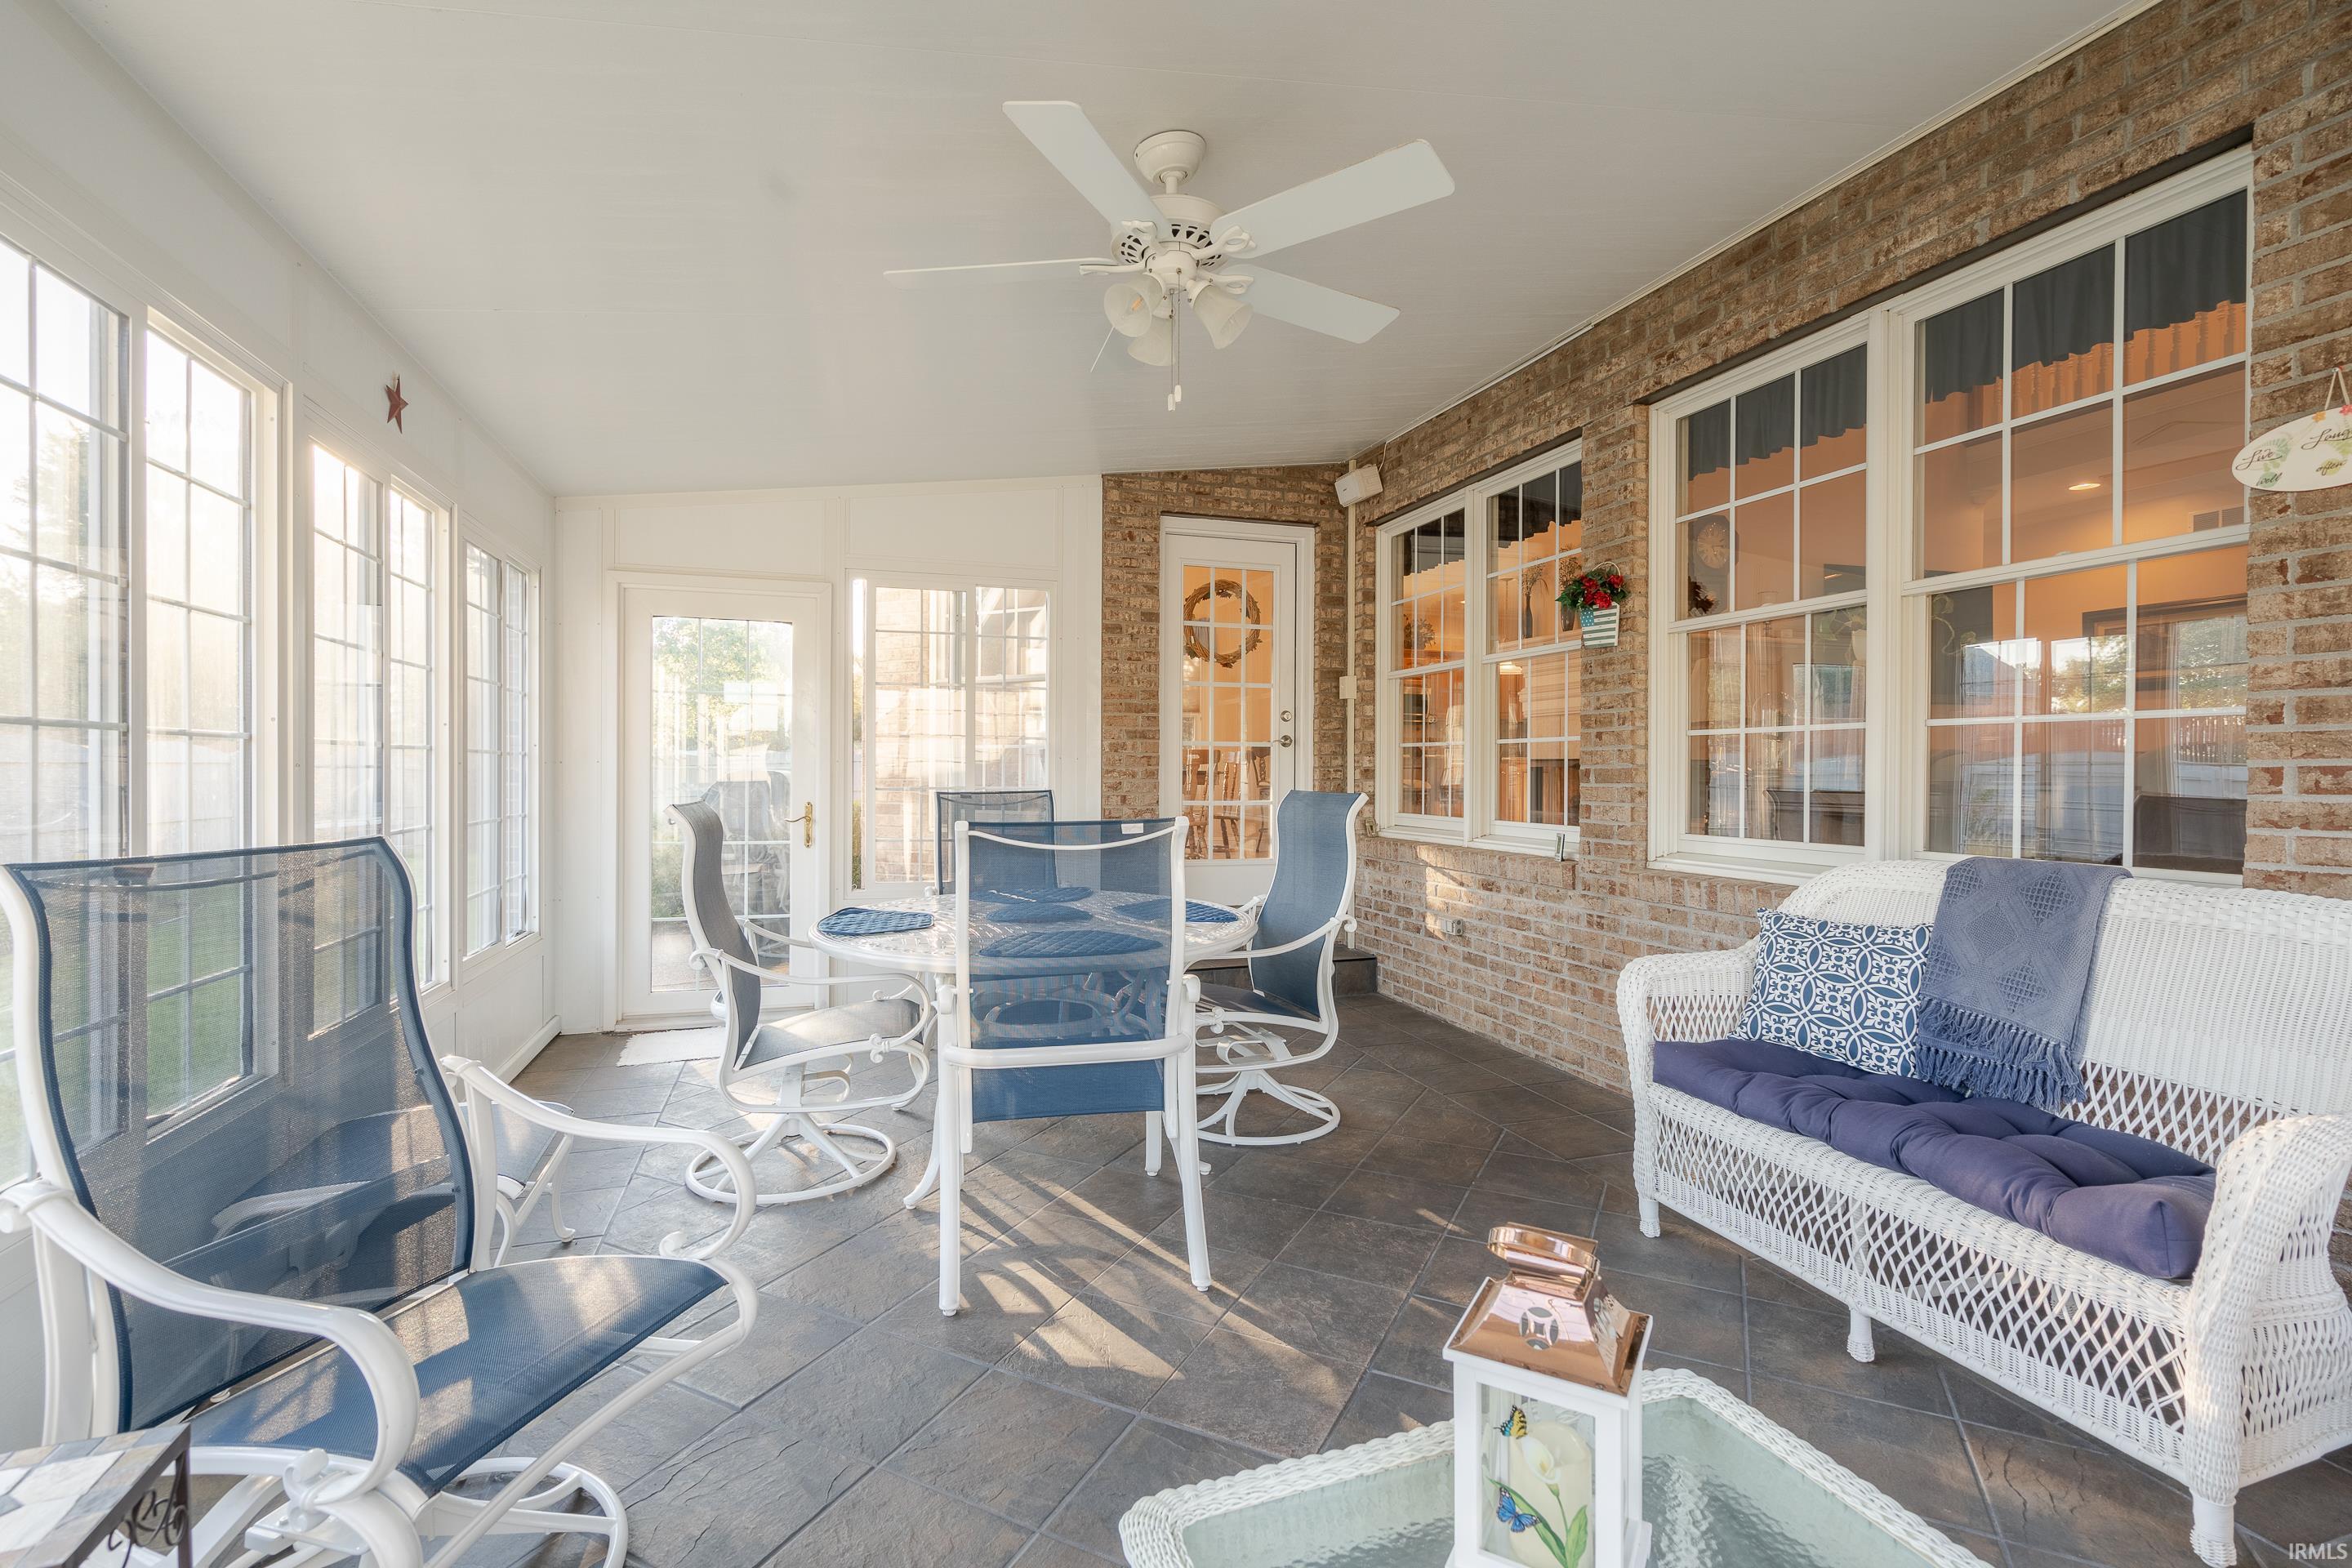 Sunroom has its own hvac for year round comfort.